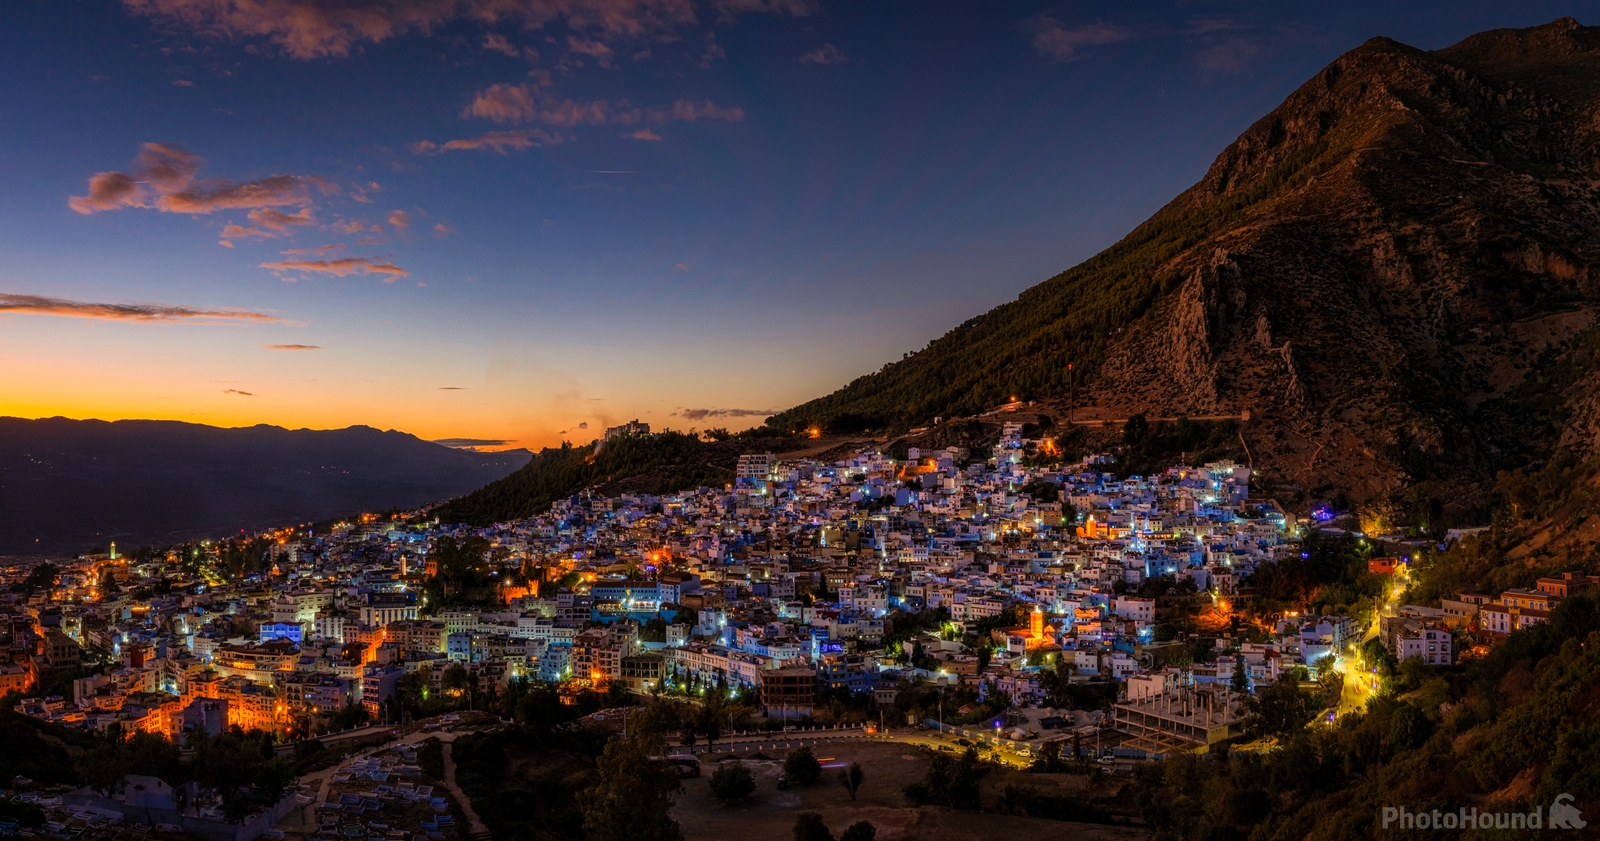 Image of Spanish Mosque at Chefchaouen by Jakub Bors